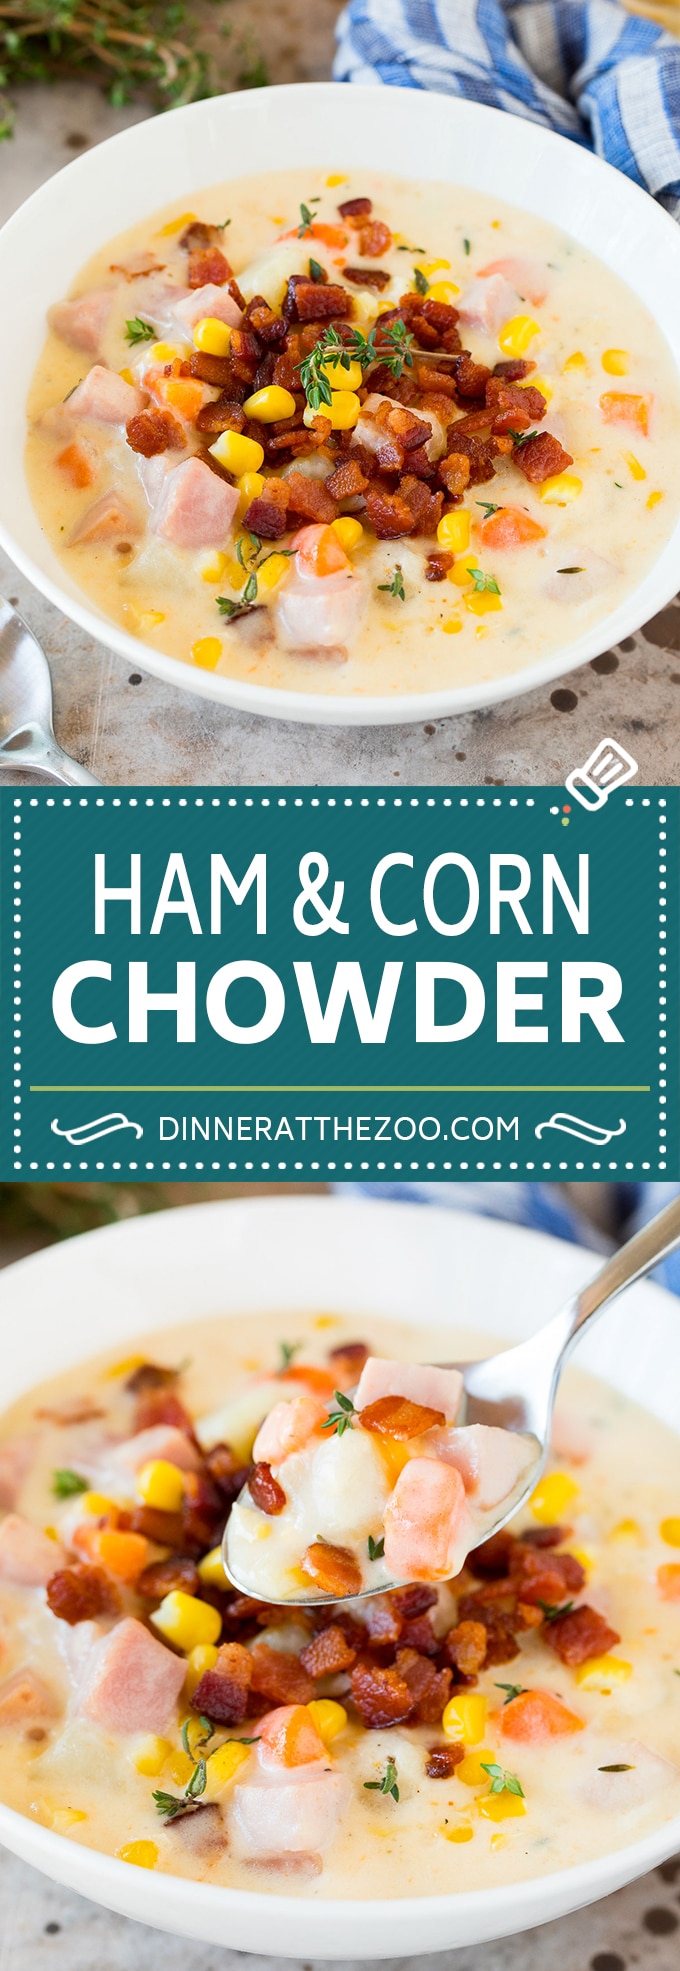 Ham and Corn Chowder - Dinner at the Zoo